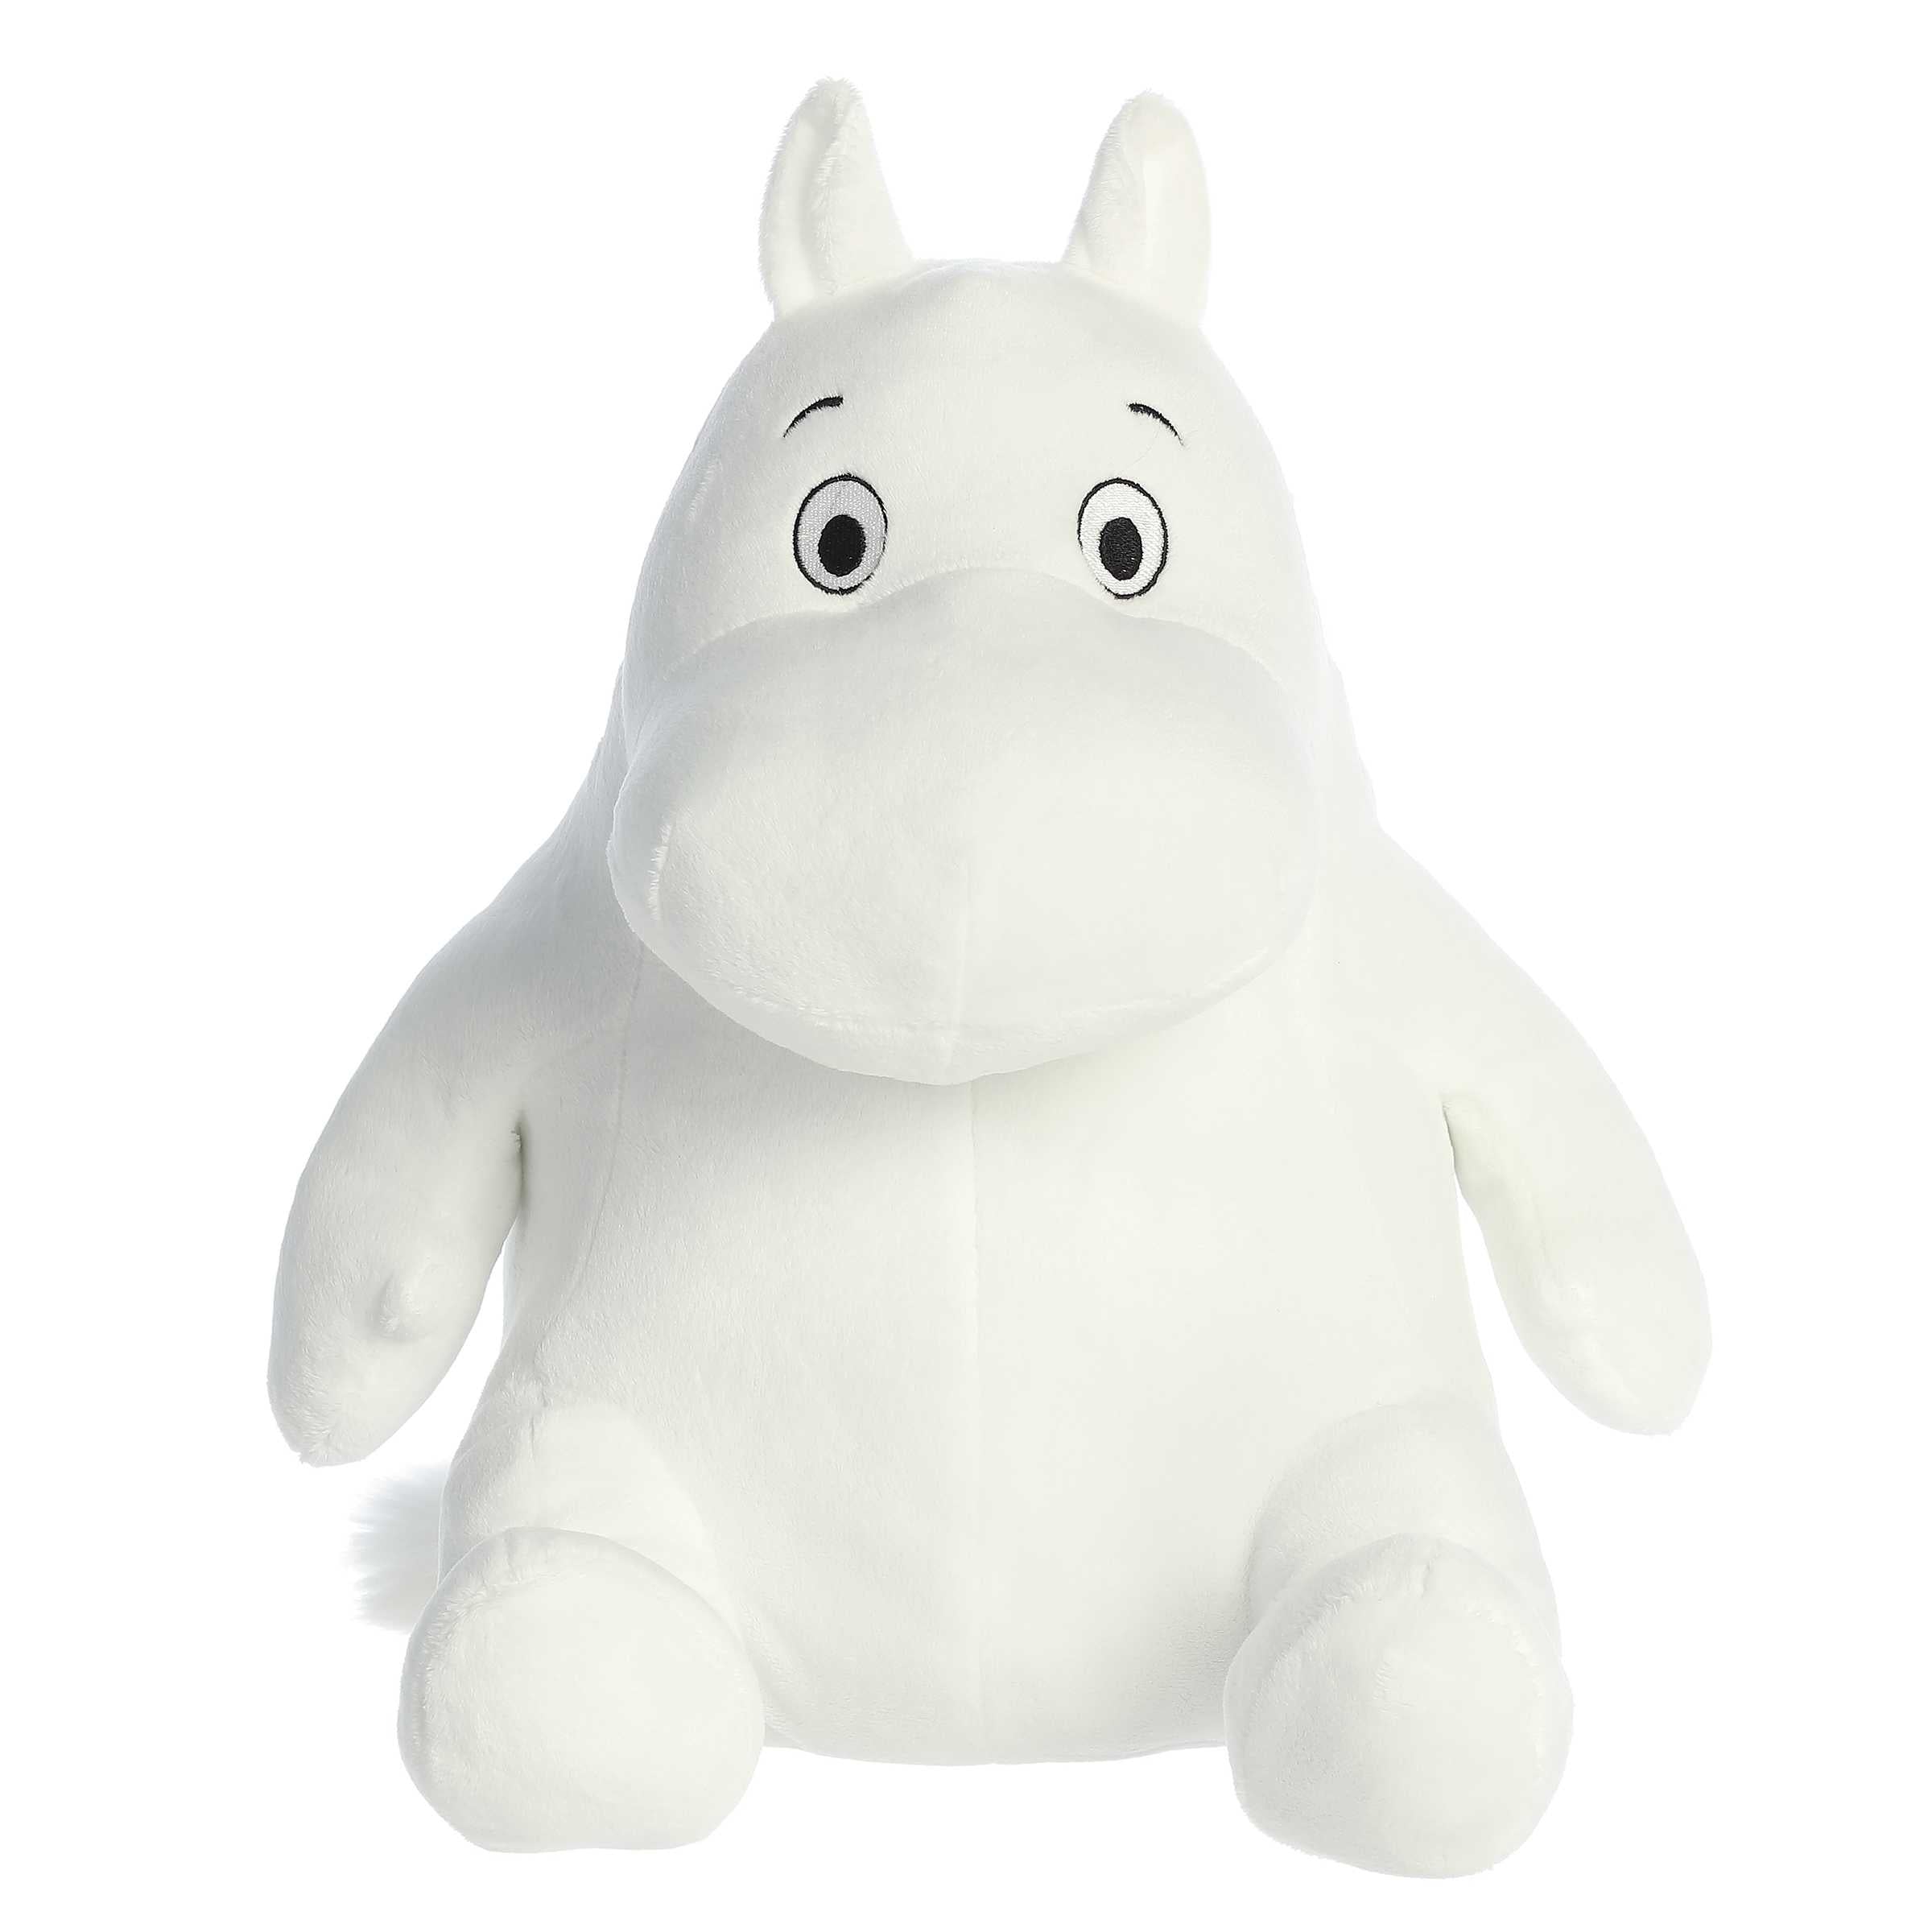 A Soft white Moomin plush in a seated position, with the iconic plump body and expressive eyes, ready for cozy snuggles